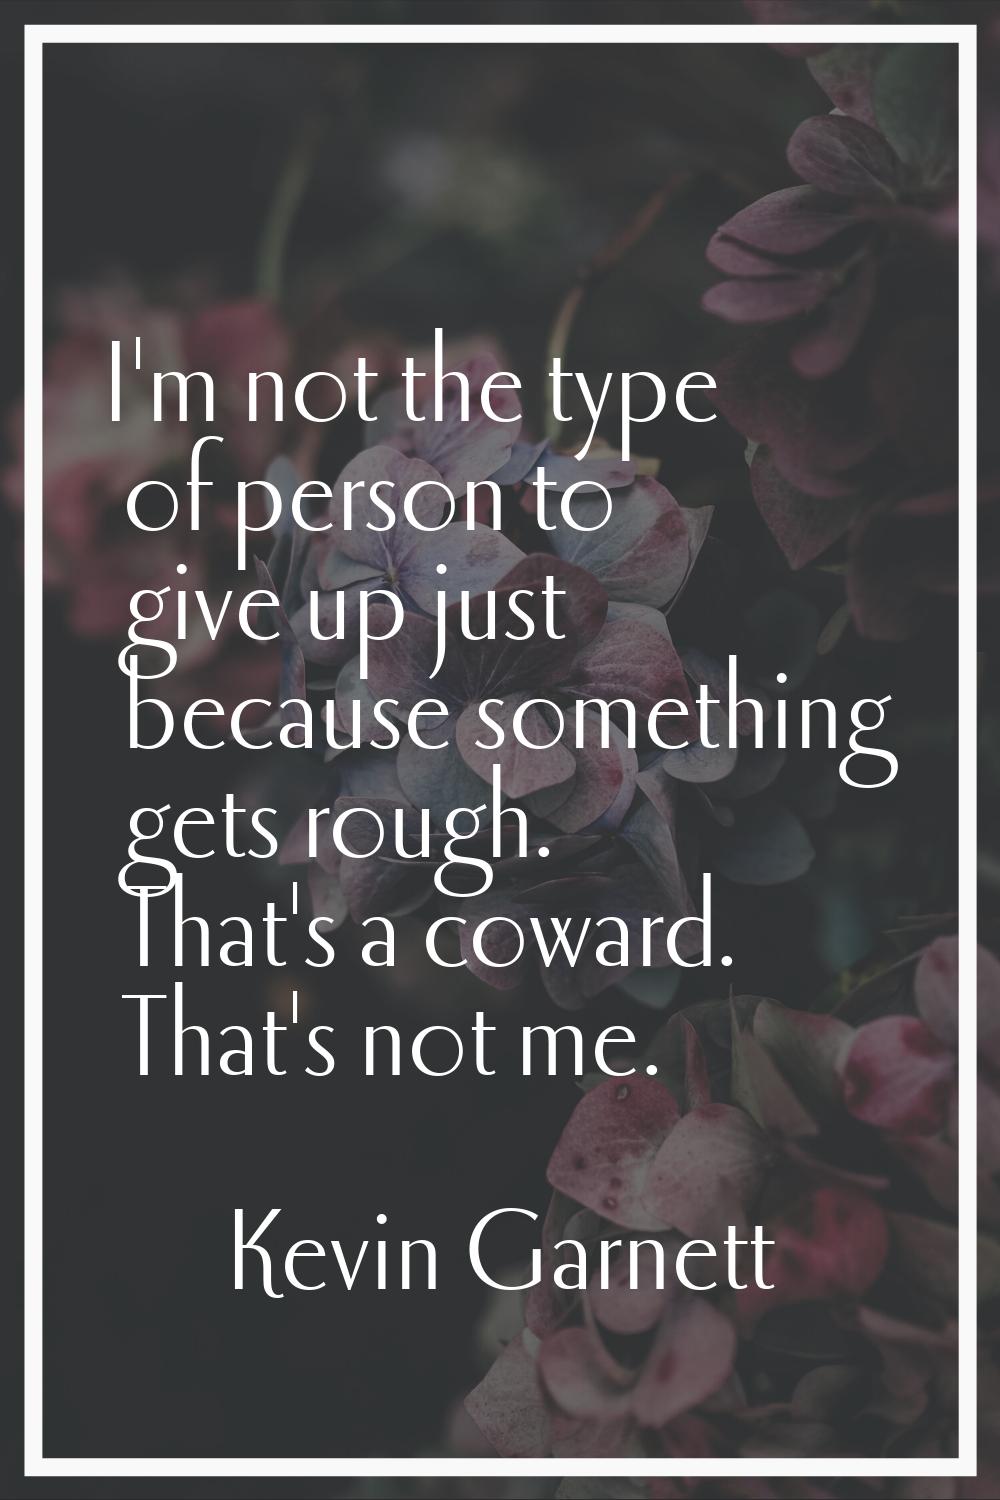 I'm not the type of person to give up just because something gets rough. That's a coward. That's no